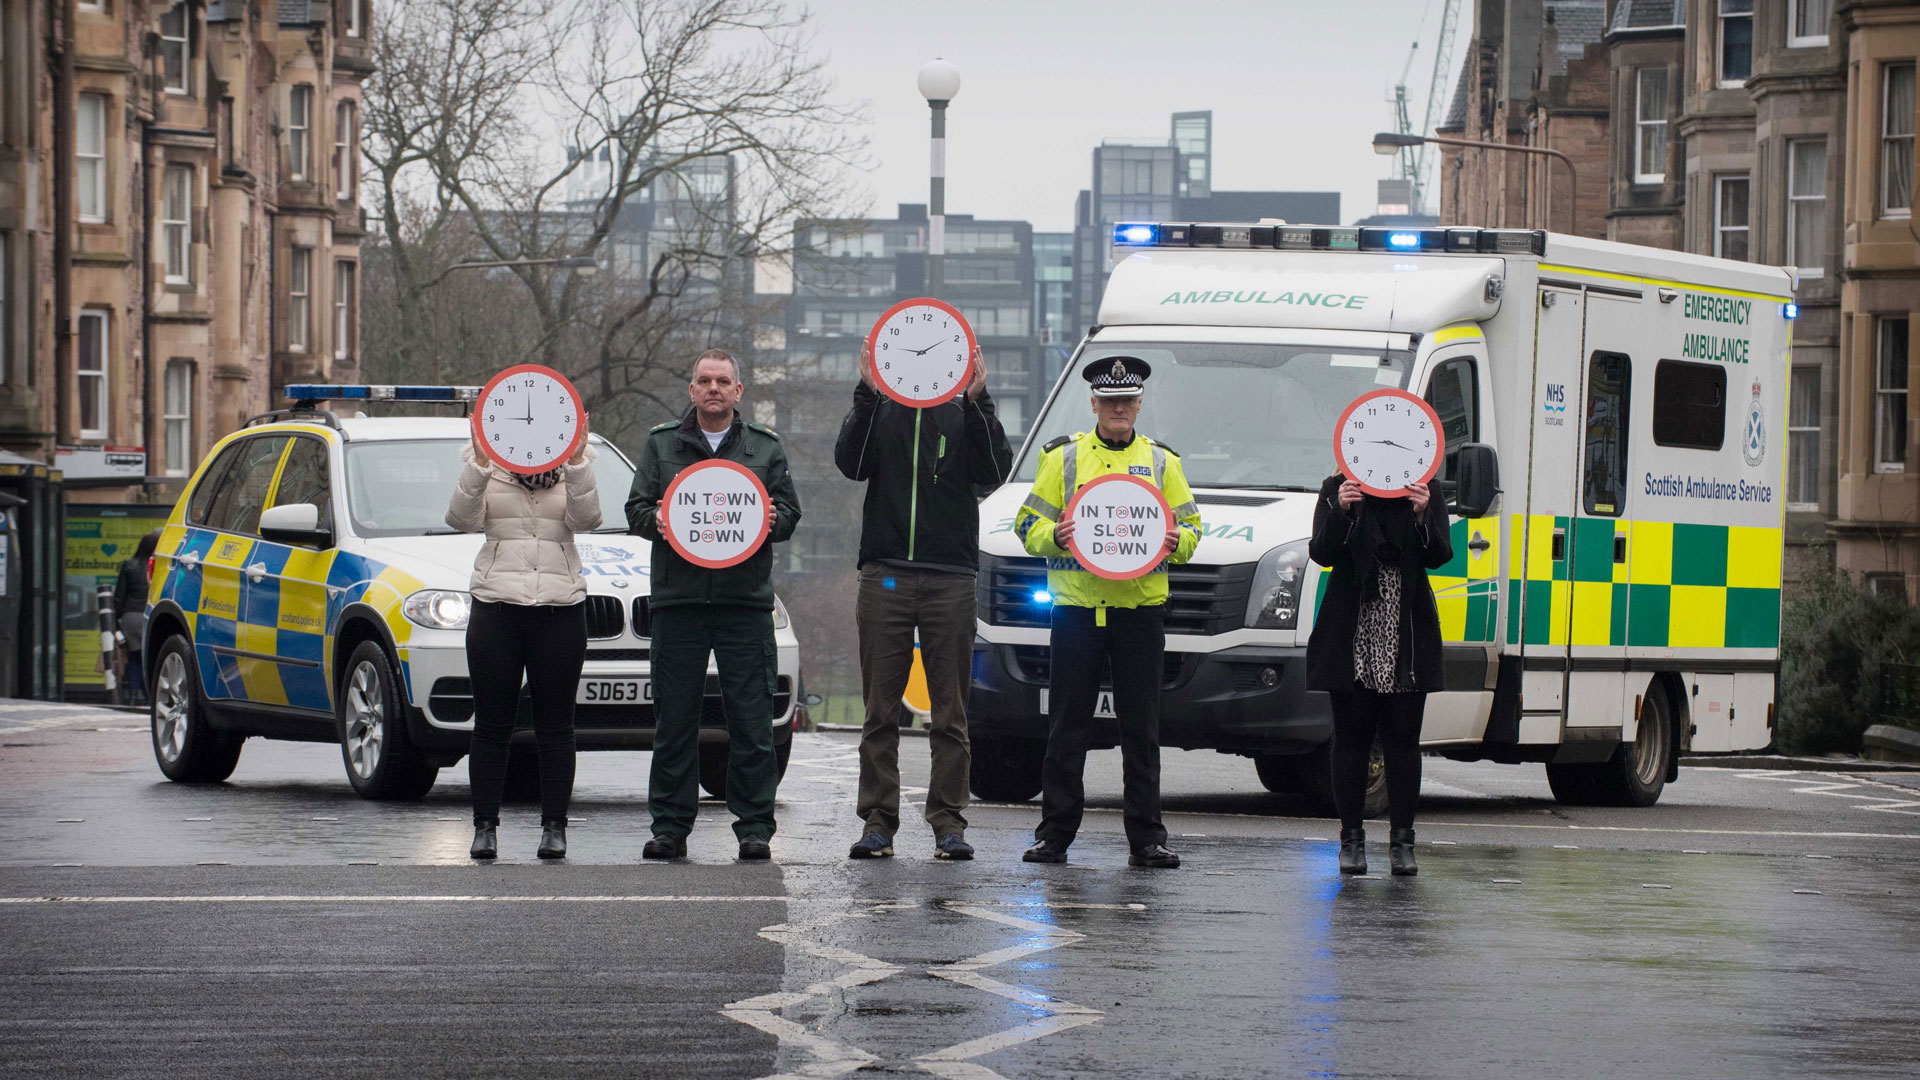 Safer Scotland: In town, slow down